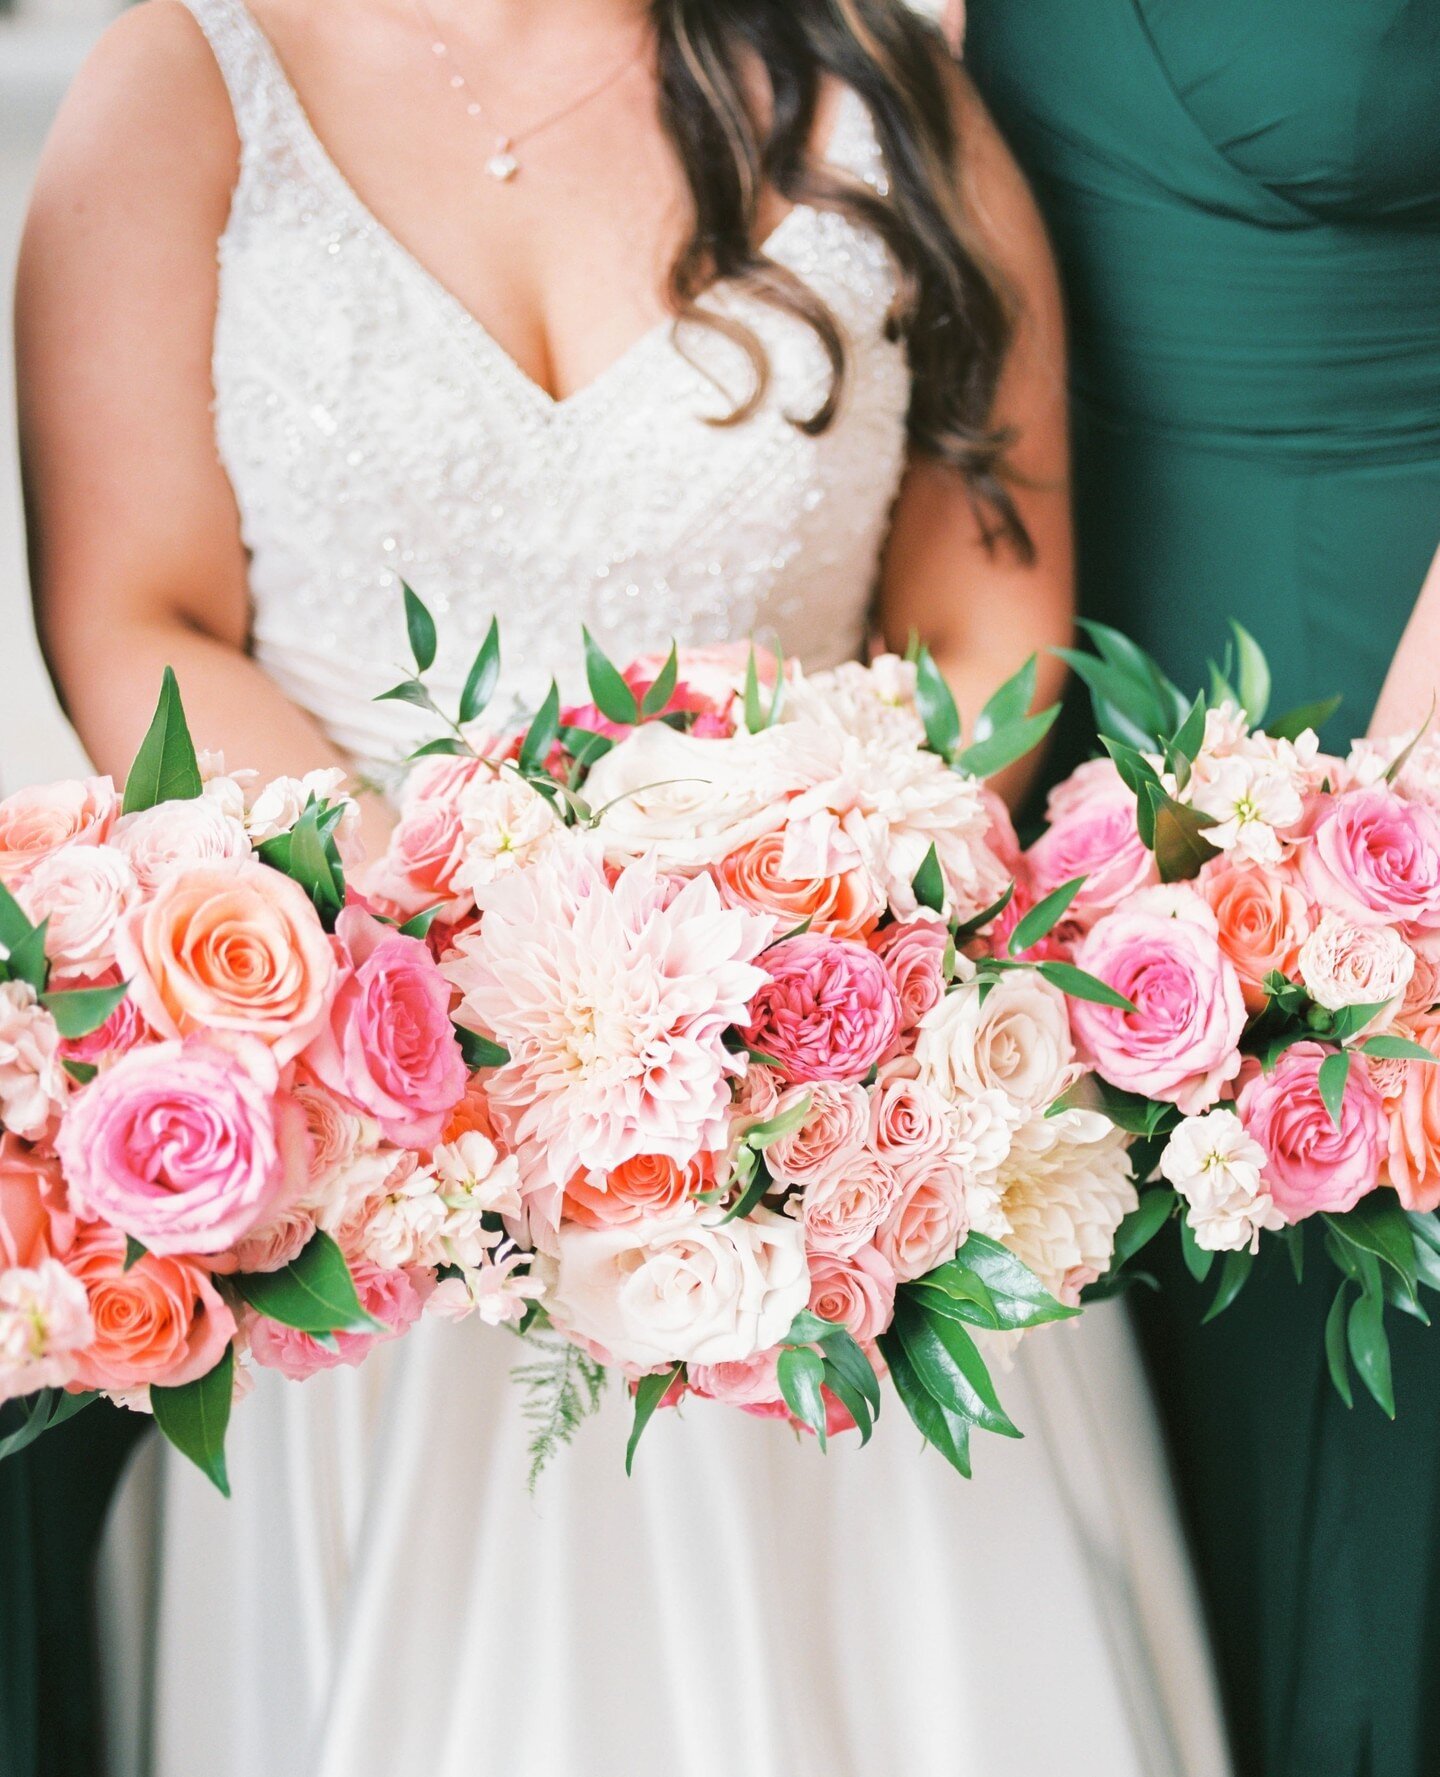 We were so happy to bring Brynn's fairytale vision to life - a lush look with cheerful colors featuring bold roses, ranunculus, and dahlias. Pink &amp; orange is such a fun palette to work with! 💗🧡💗⁠
⁠
Photos: @lam_photo